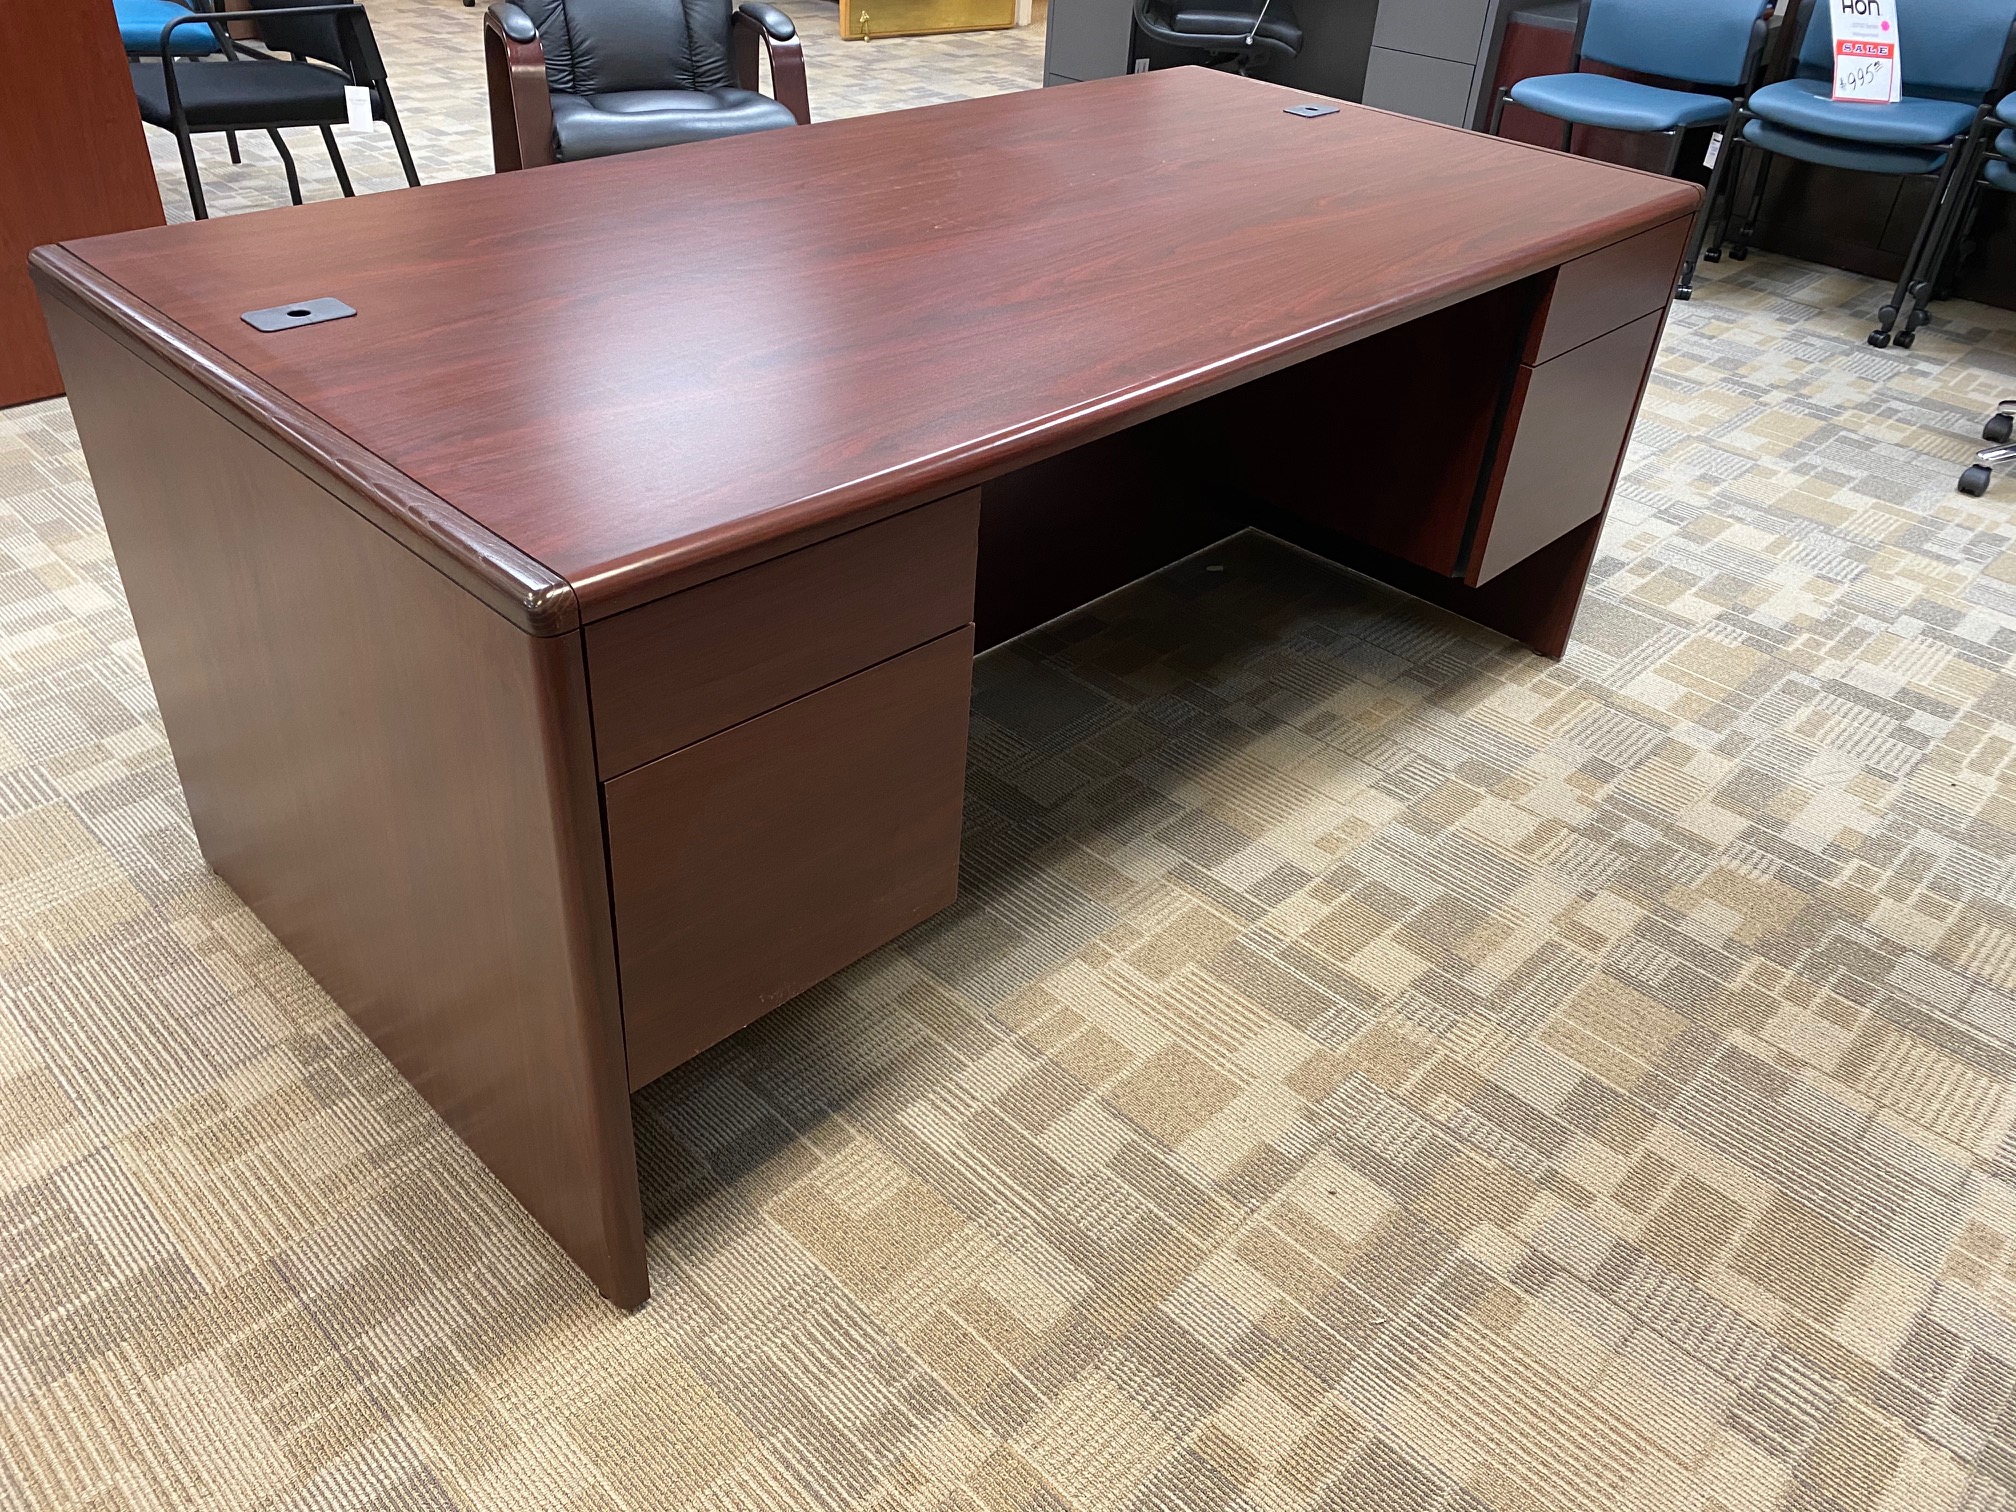 Used Office Furniture Archives - Workspace SolutionsWorkspace Solutions